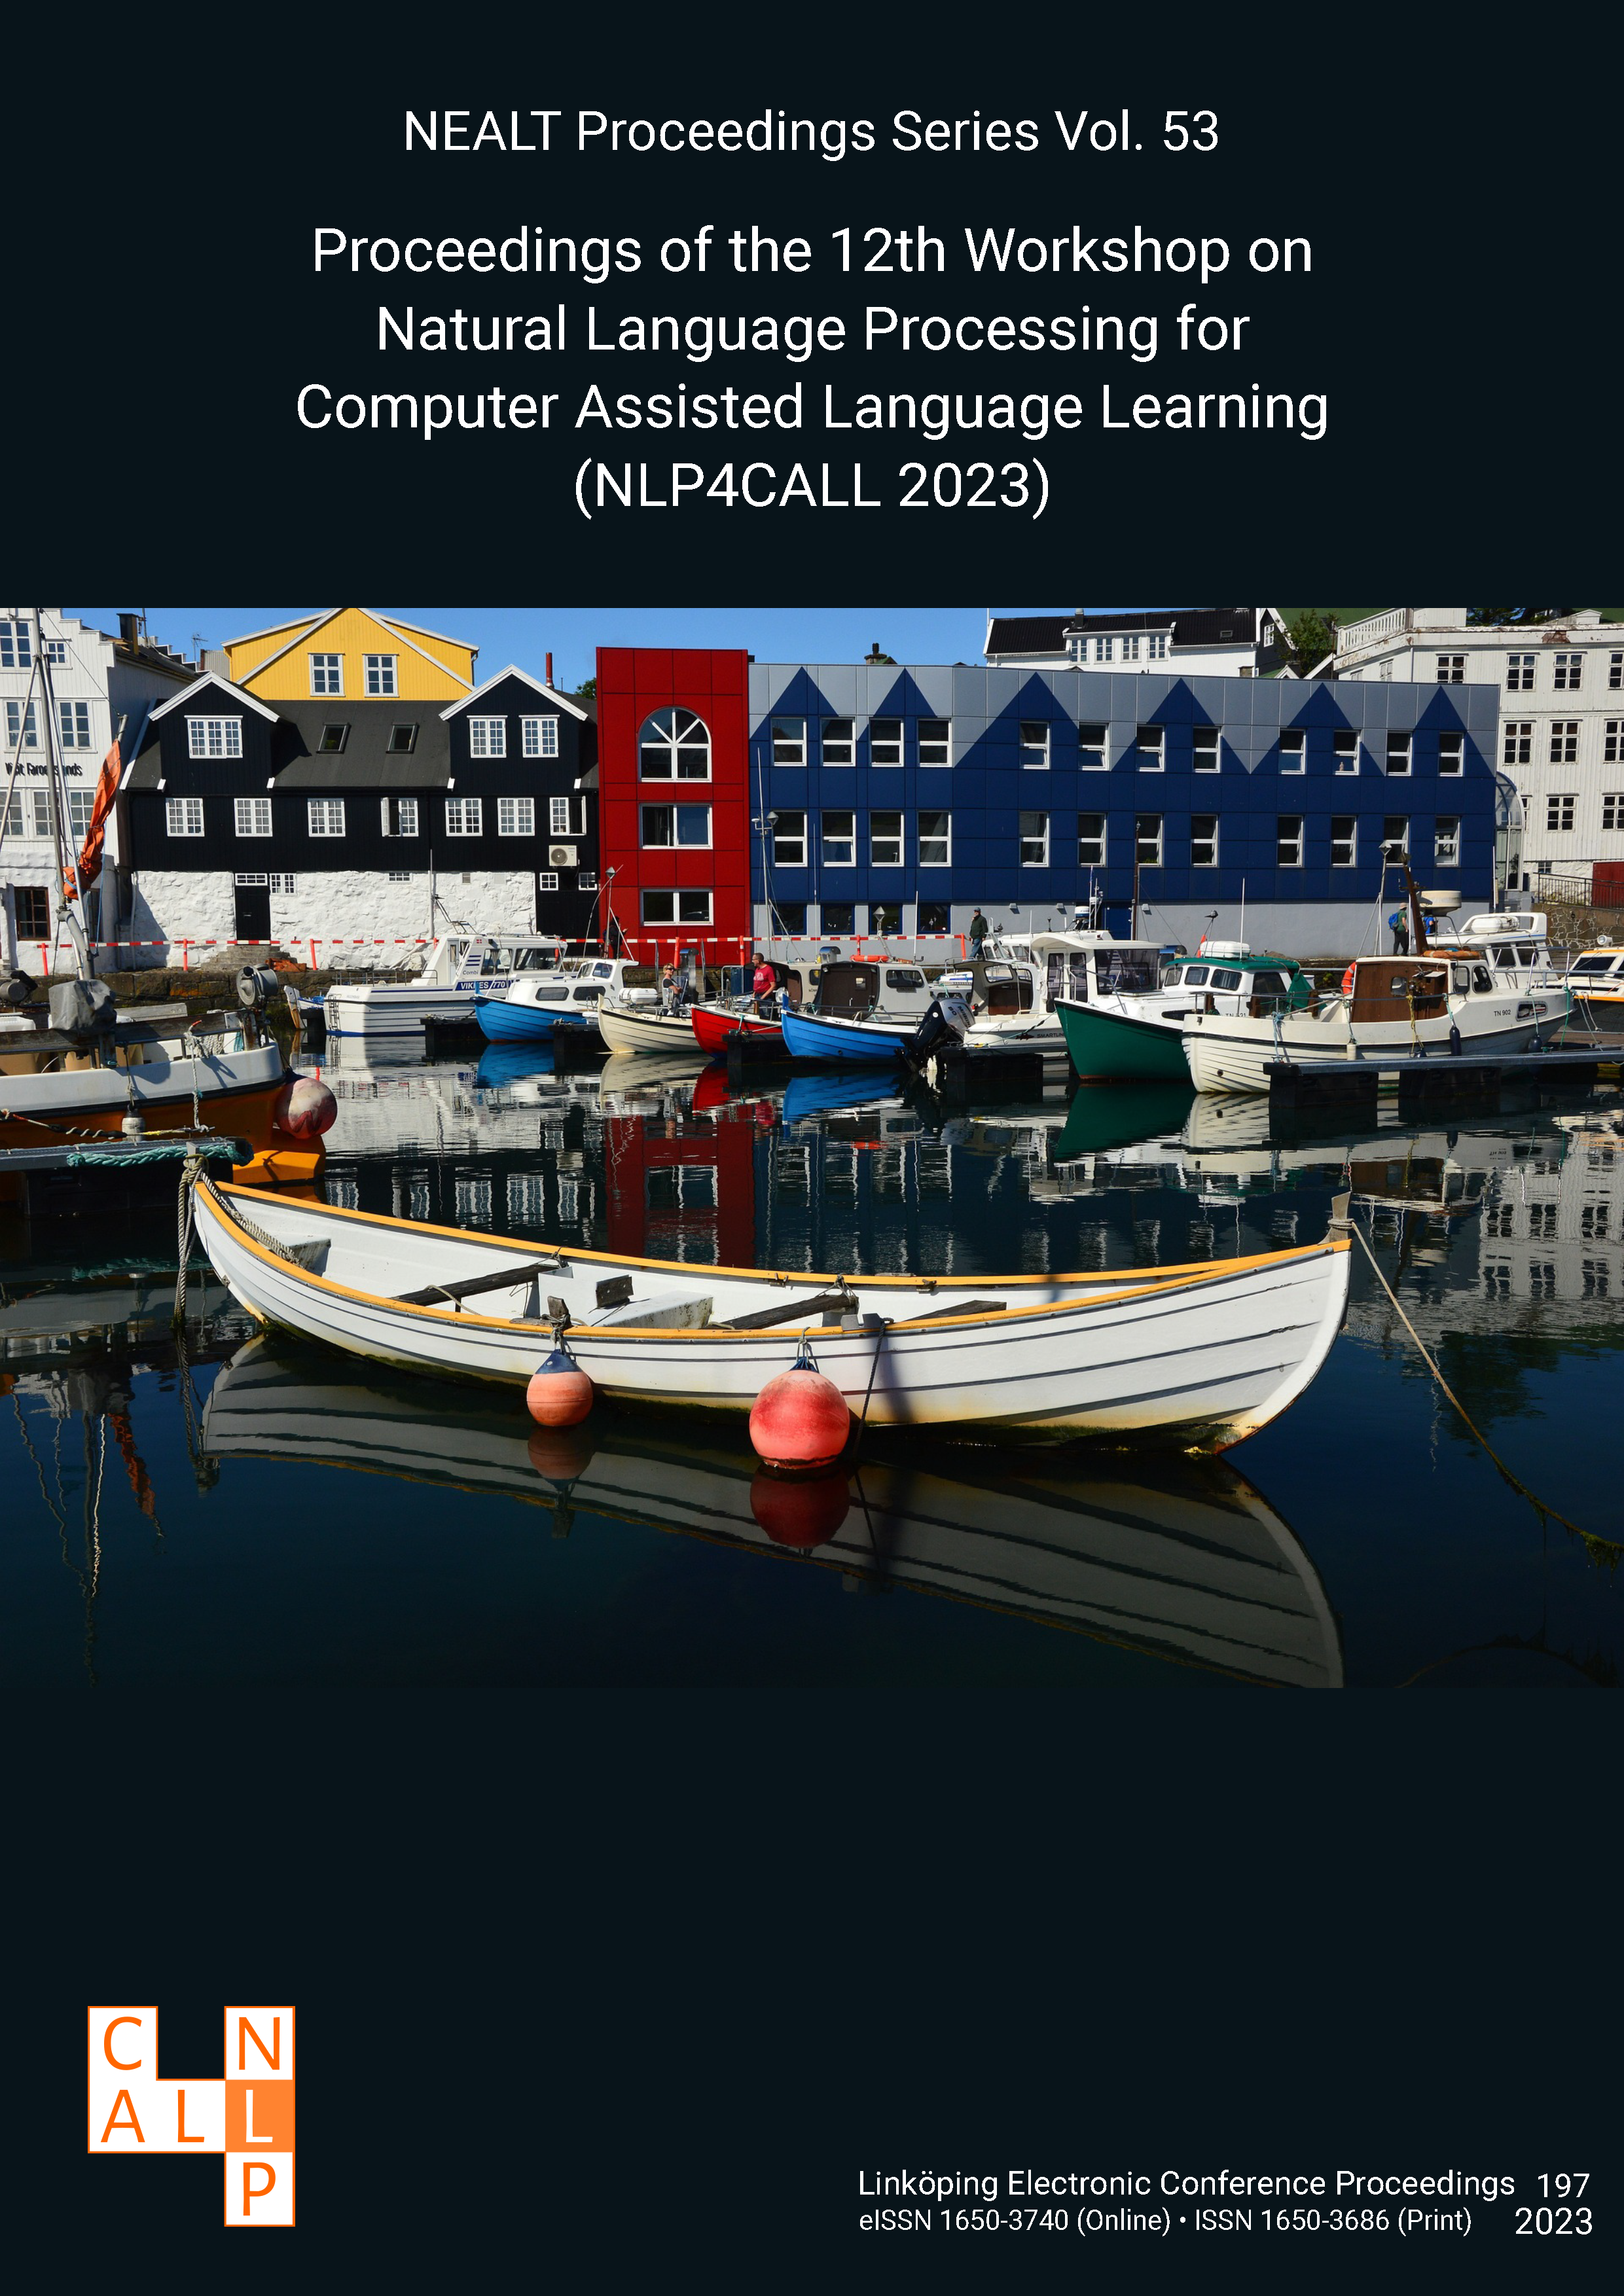 					View Proceedings of the 12th Workshop on Natural Language Processing for Computer Assisted Language Learning (NLP4CALL 2023)
				